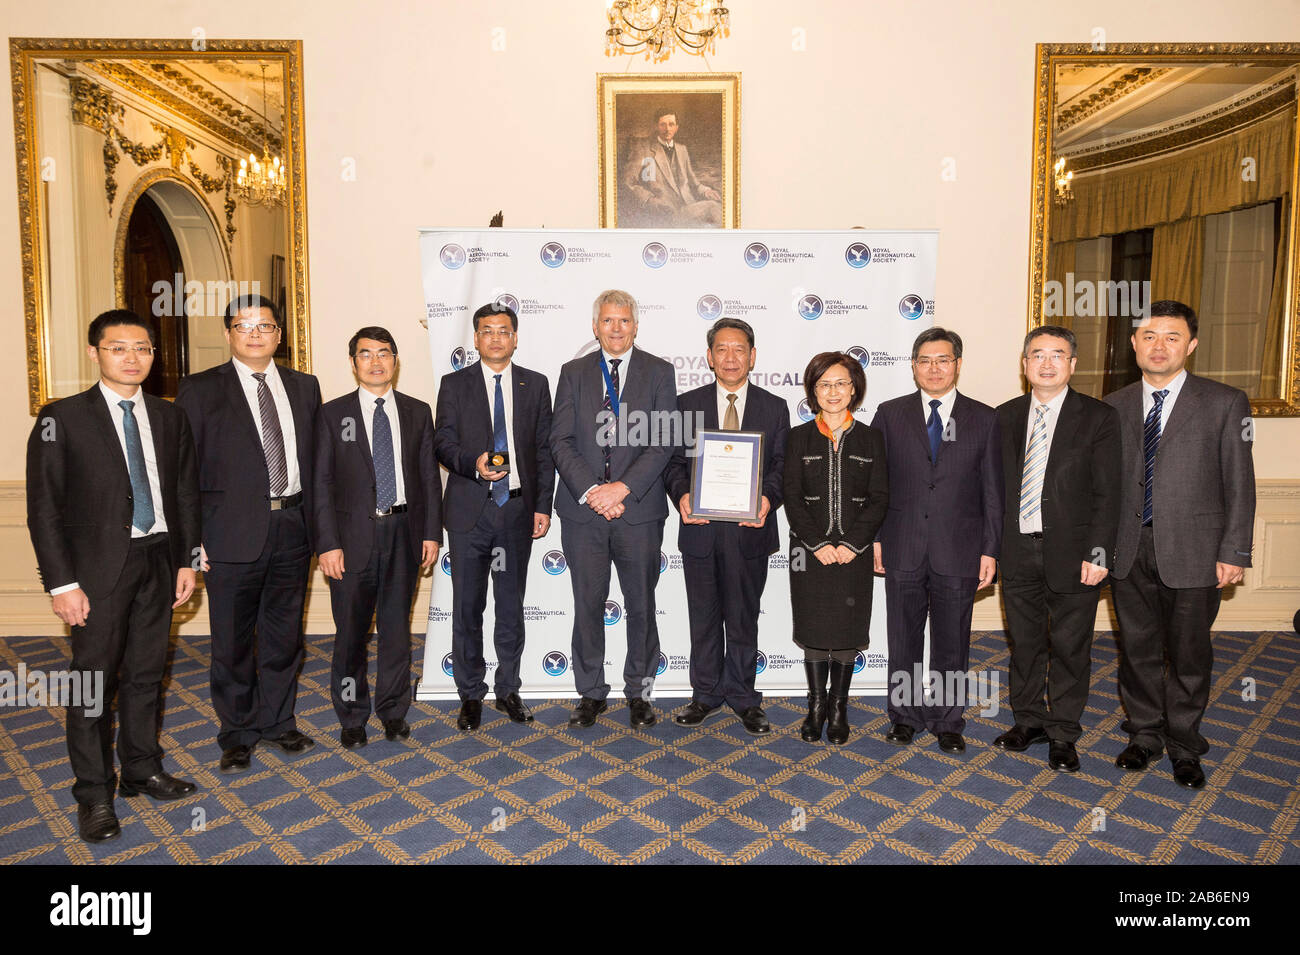 London, Britain. 25th Nov, 2019. Members of China's Chang'e-4 mission team pose for a group photo with guests at the award ceremony of Royal Aeronautical Society (RAeS) in London, Britain, on Nov. 25, 2019. China's Chang'e-4 mission team on Monday received the only Team Gold Medal of the year awarded by Royal Aeronautical Society (RAeS) of the United Kingdom at its annual award ceremony held in London. Credit: Ray Tang/Xinhua/Alamy Live News Stock Photo